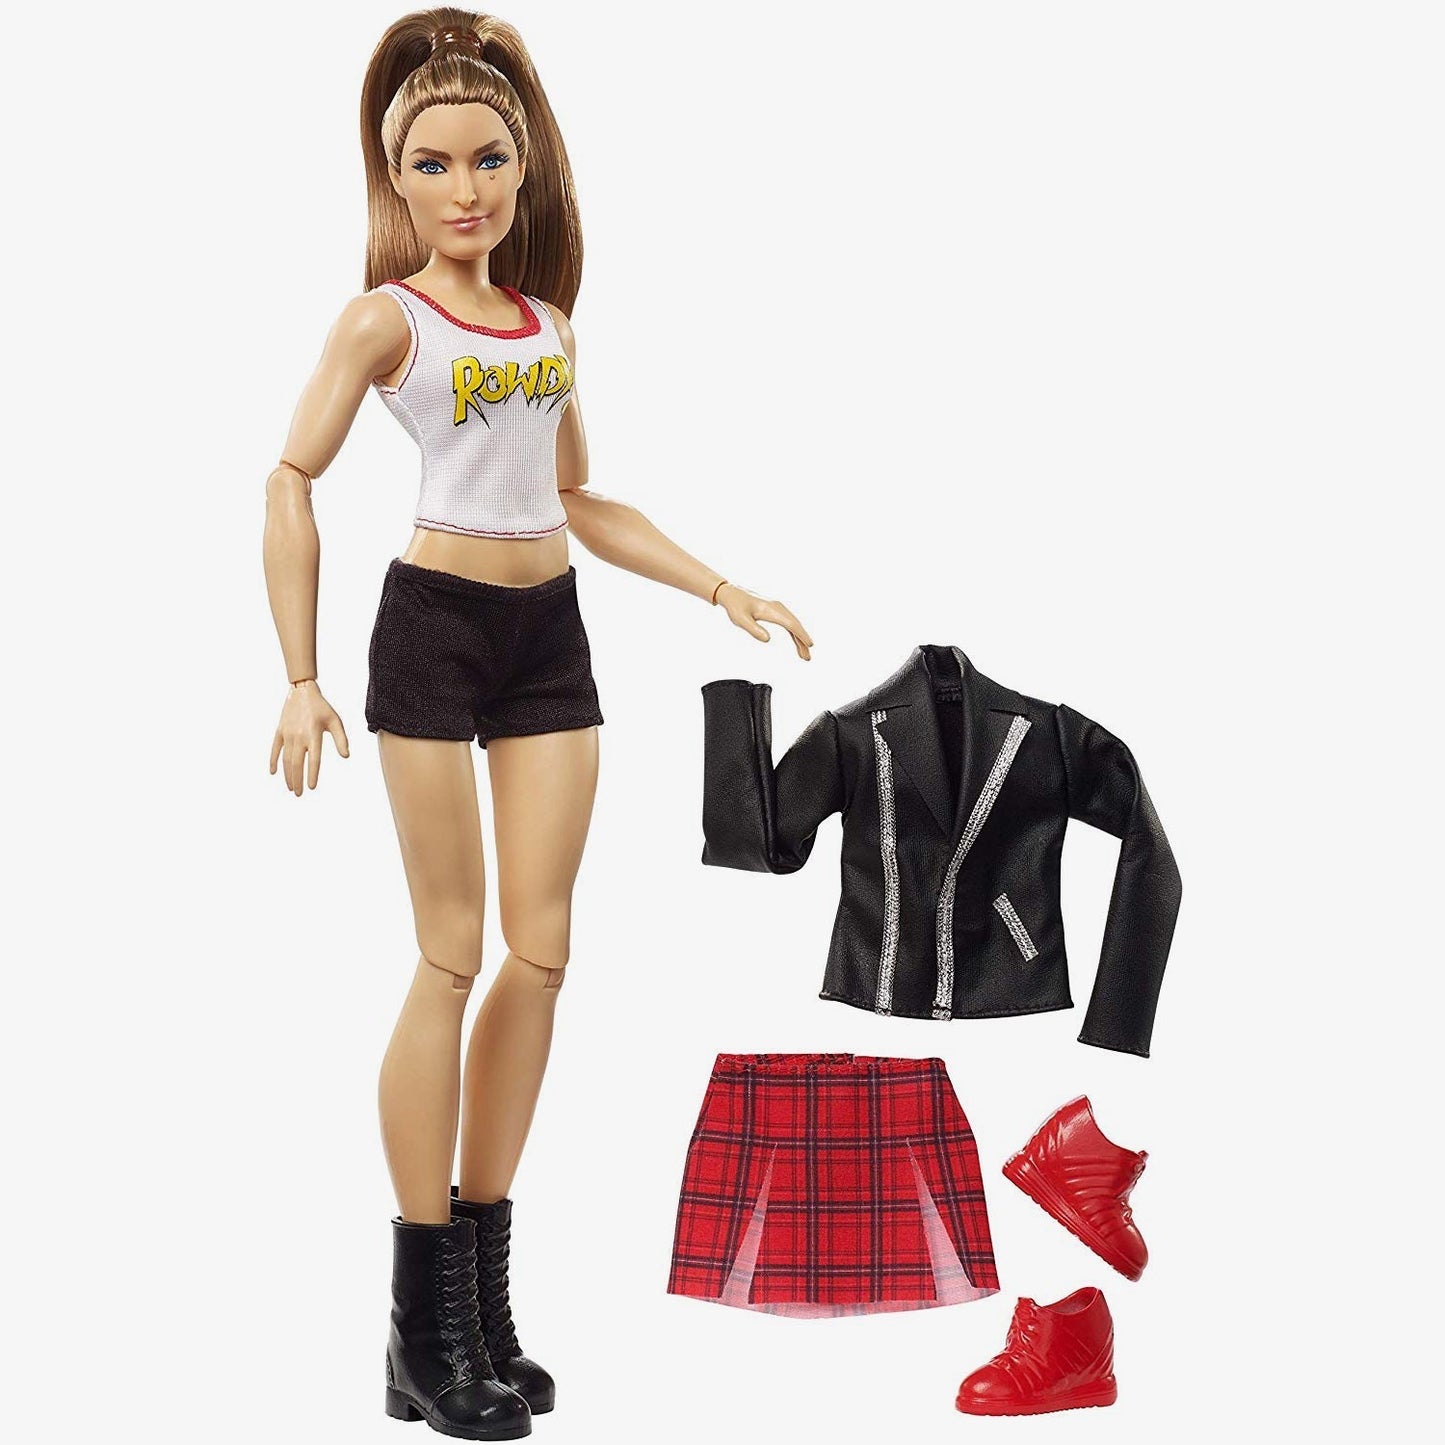 Ronda Rousey - 12 inch WWE Fashion Doll (With Extra Accessories)